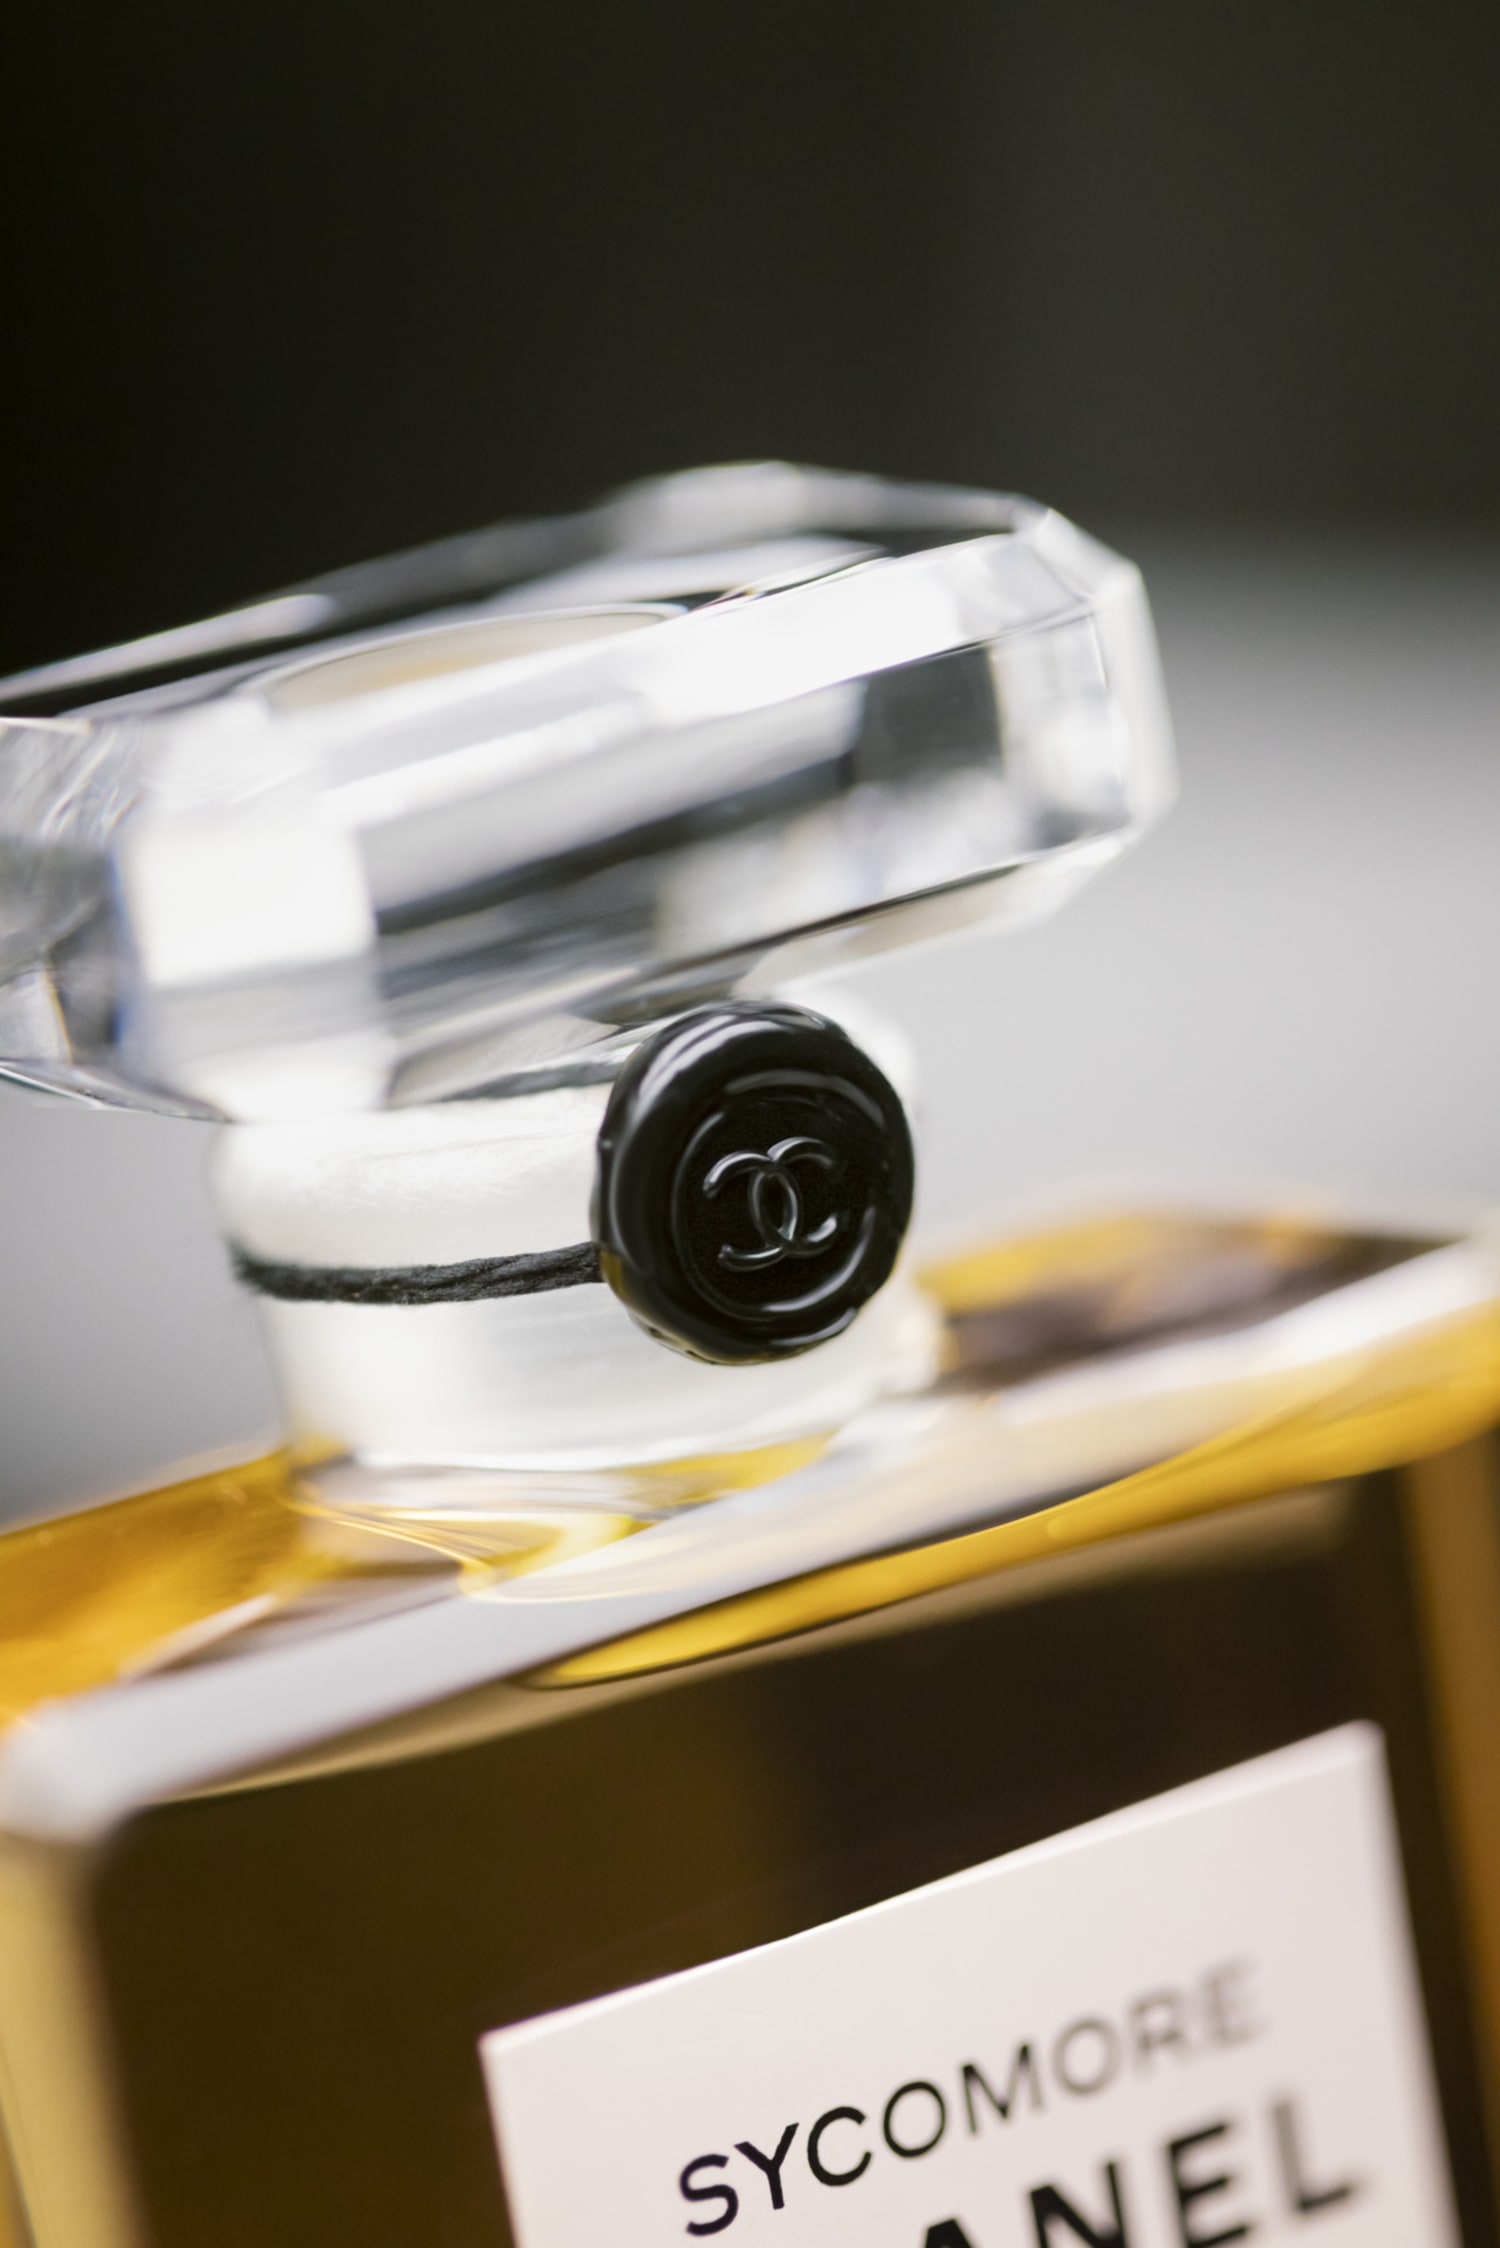 Chanel Sycomore Parfum Made By Maisons d'Art ~ Fragrance News